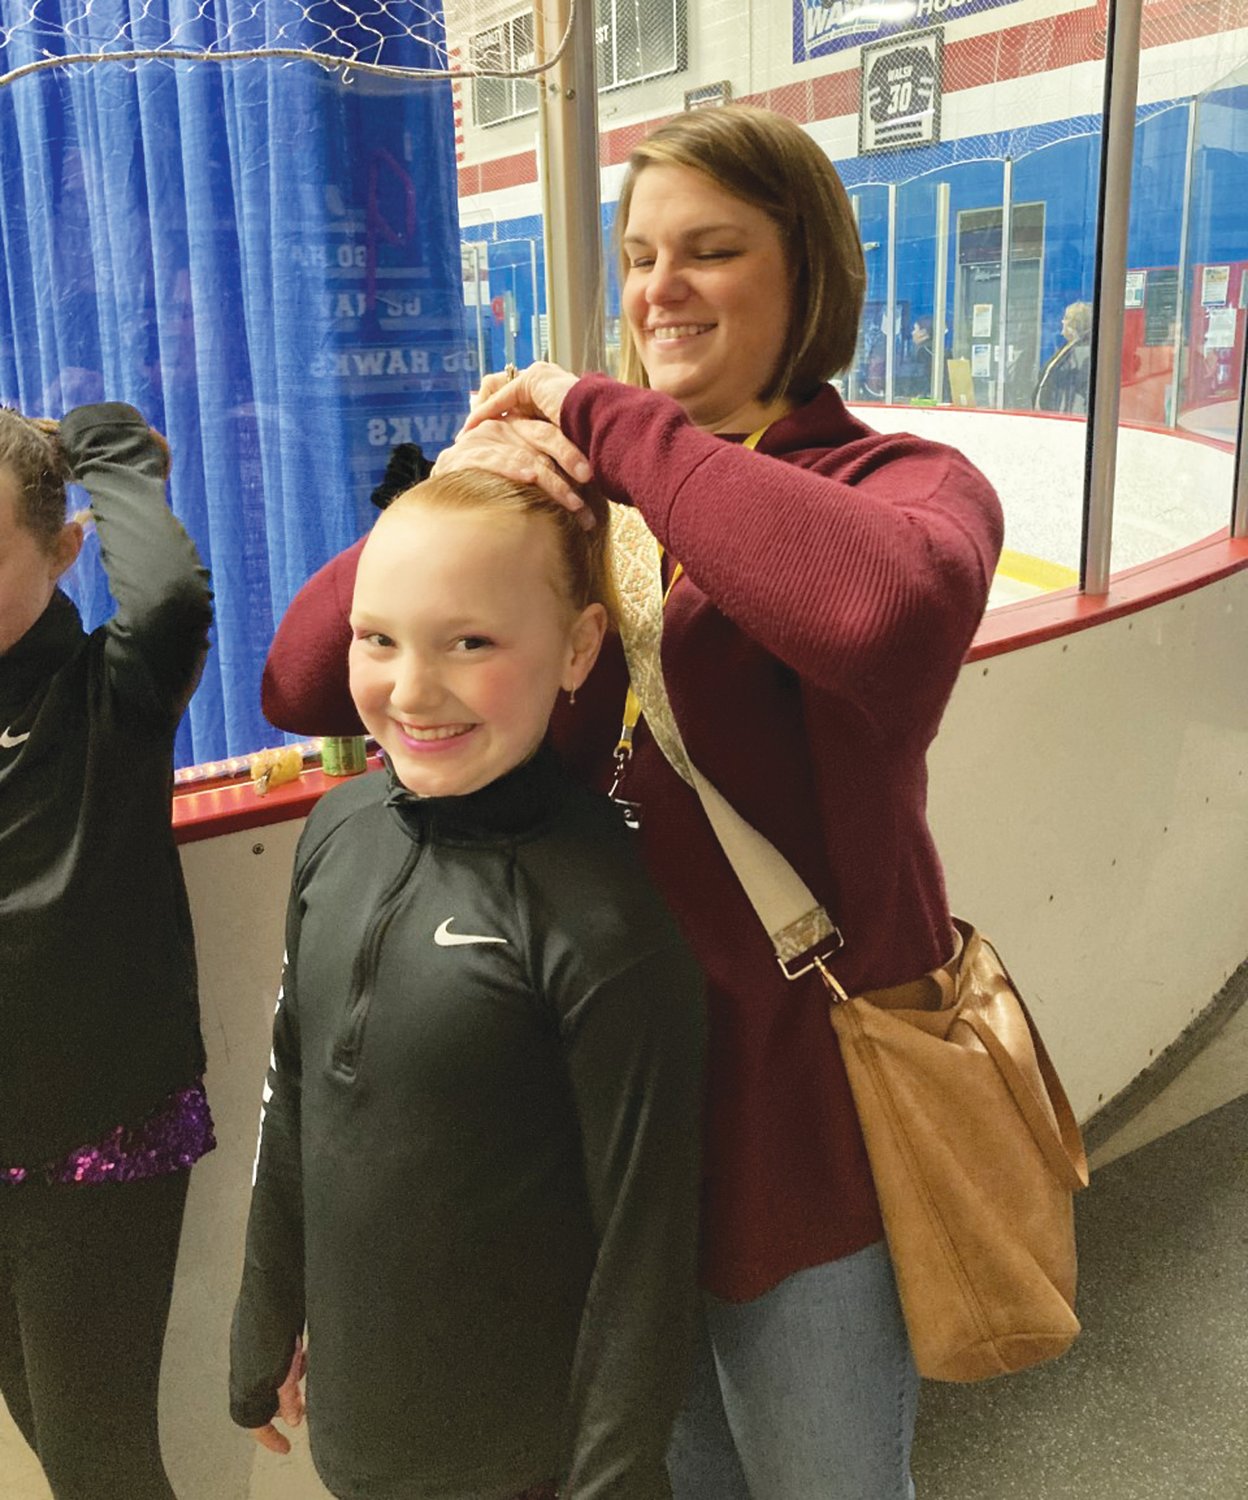 NEW DO: Nine year old Brooklyn Laskowski gets a new hairdo from her mom Bethany in between numbers. Brooklyn is a member of The Snowflakes and skated to Taylor Swifts 2014 song Shake It Off. Mom Bethany herself is a decorated WFS veteran of many years. They live in Warwick and Brooklyn is in the 4th grade at St. Kevin’s.